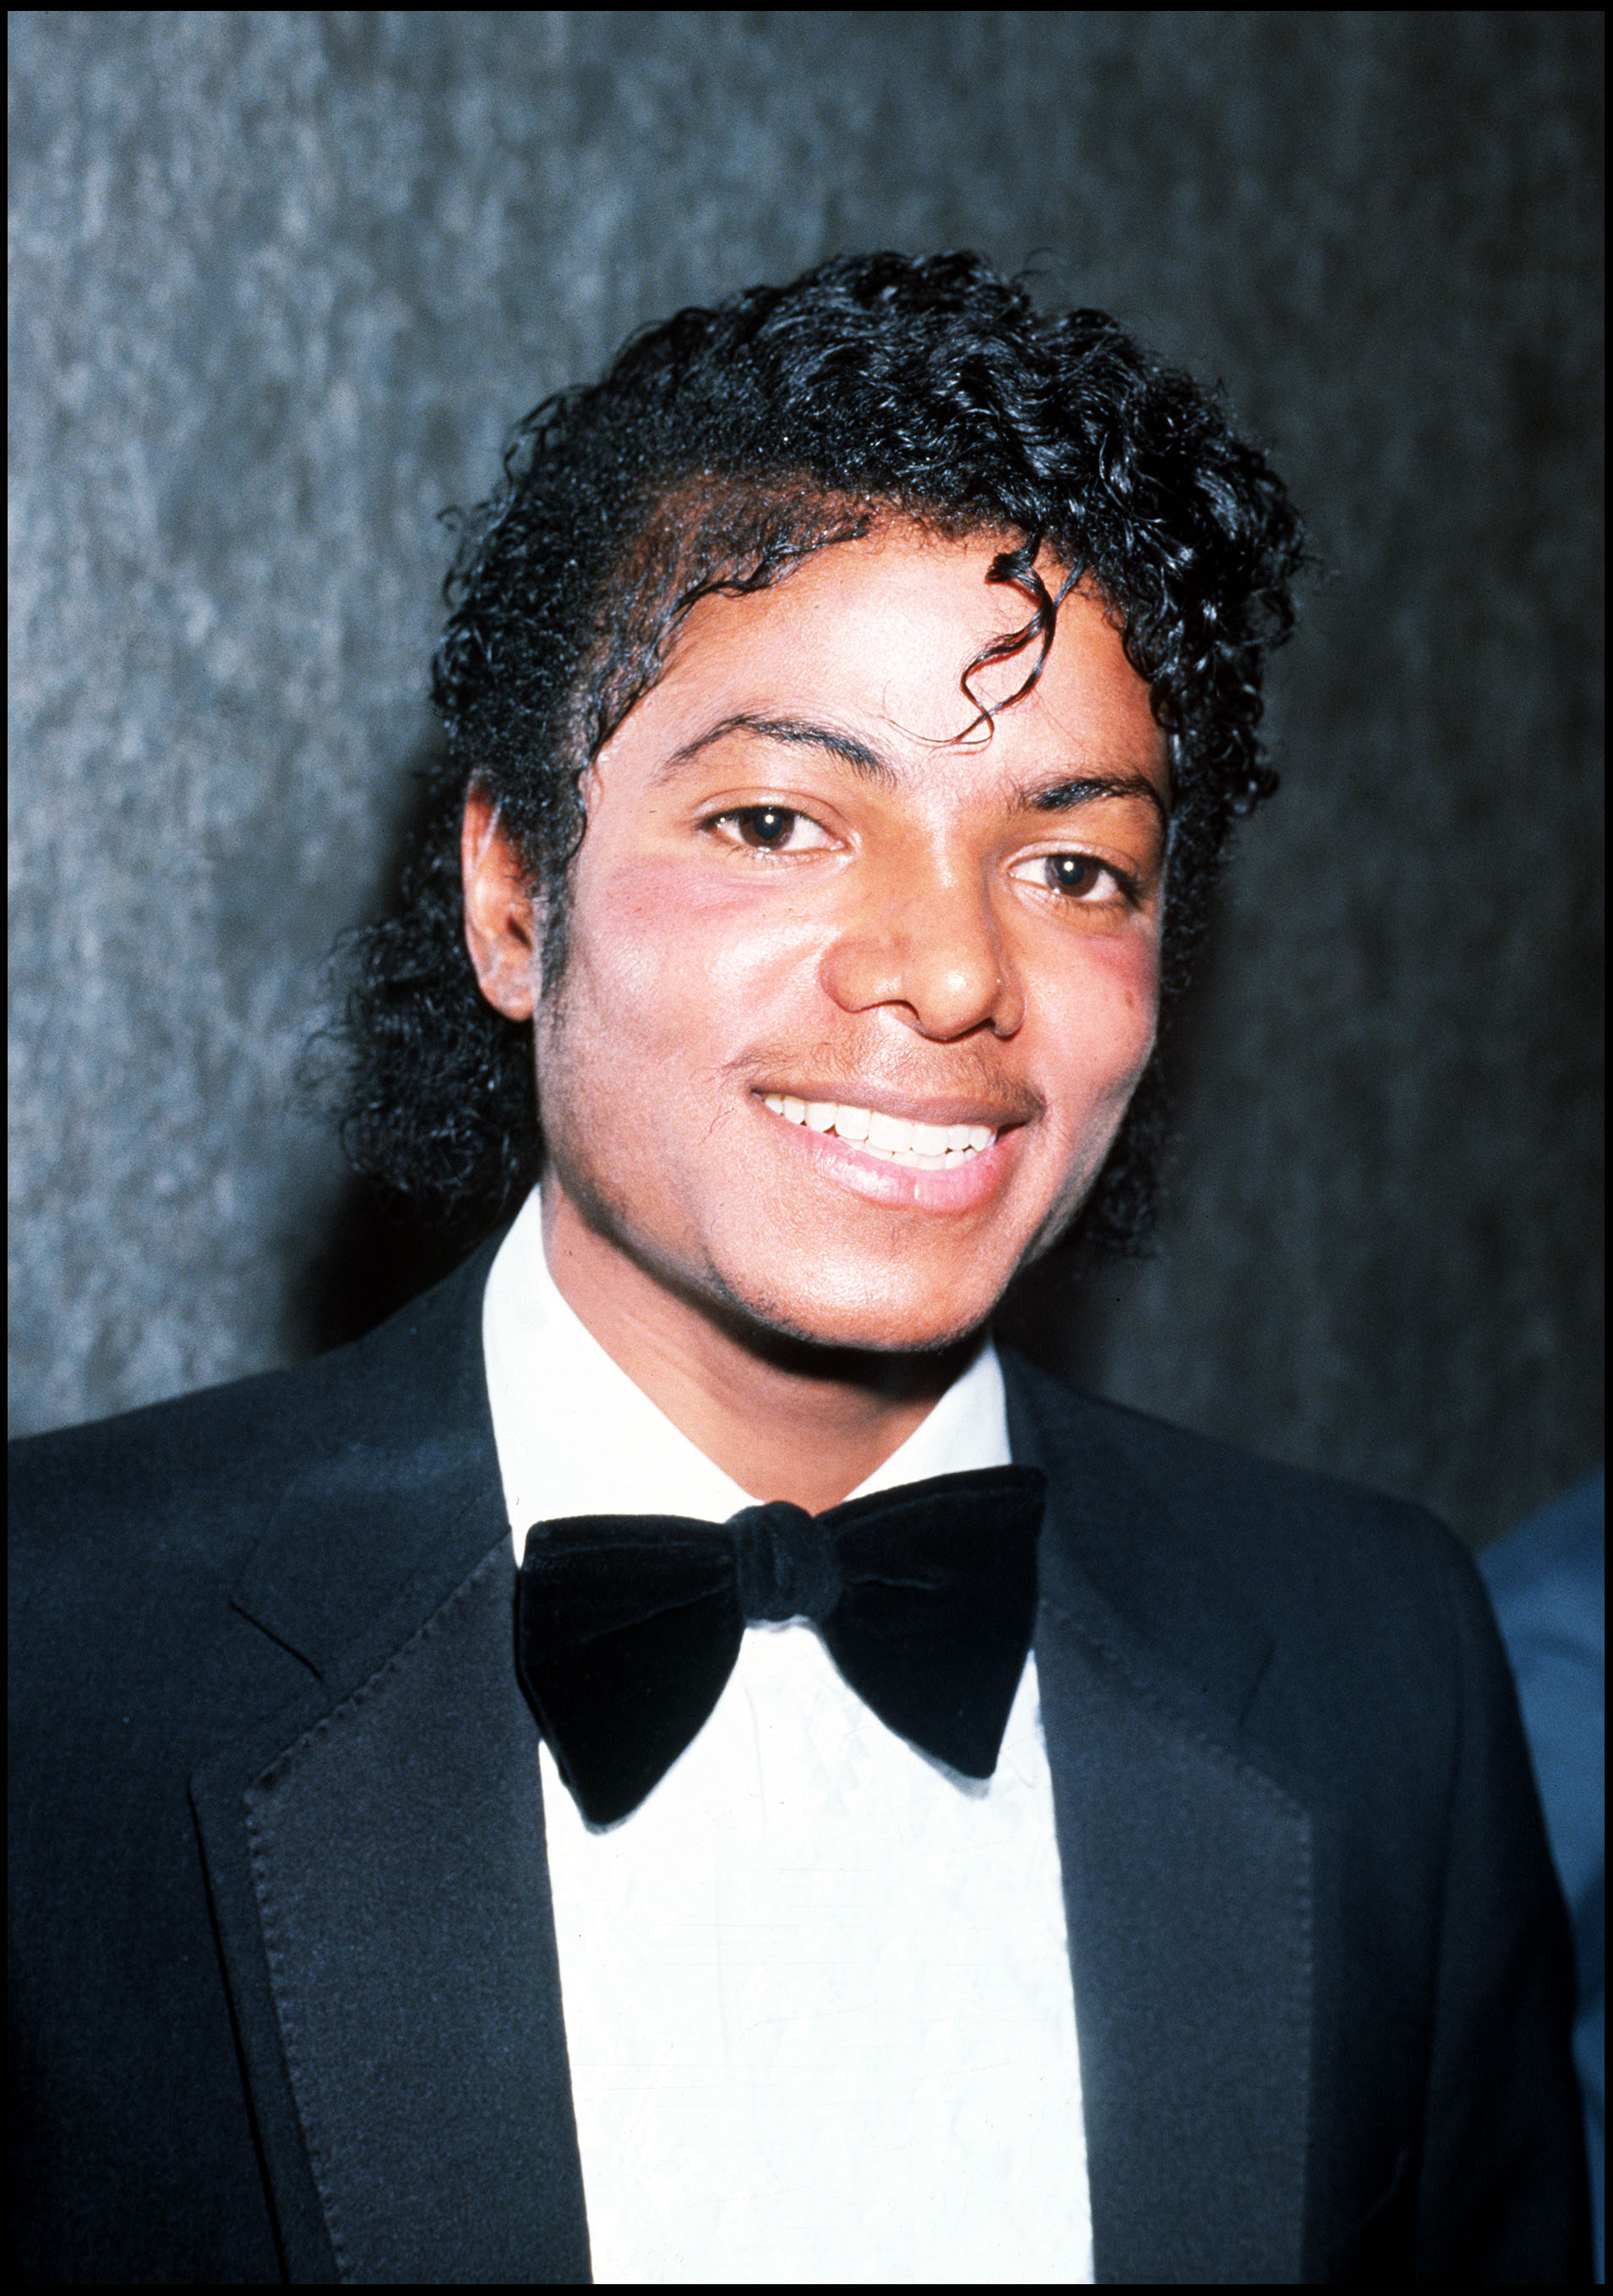 Michael Jackson at the BPI awards on February 8, 1983 in London. | Source: Getty Images